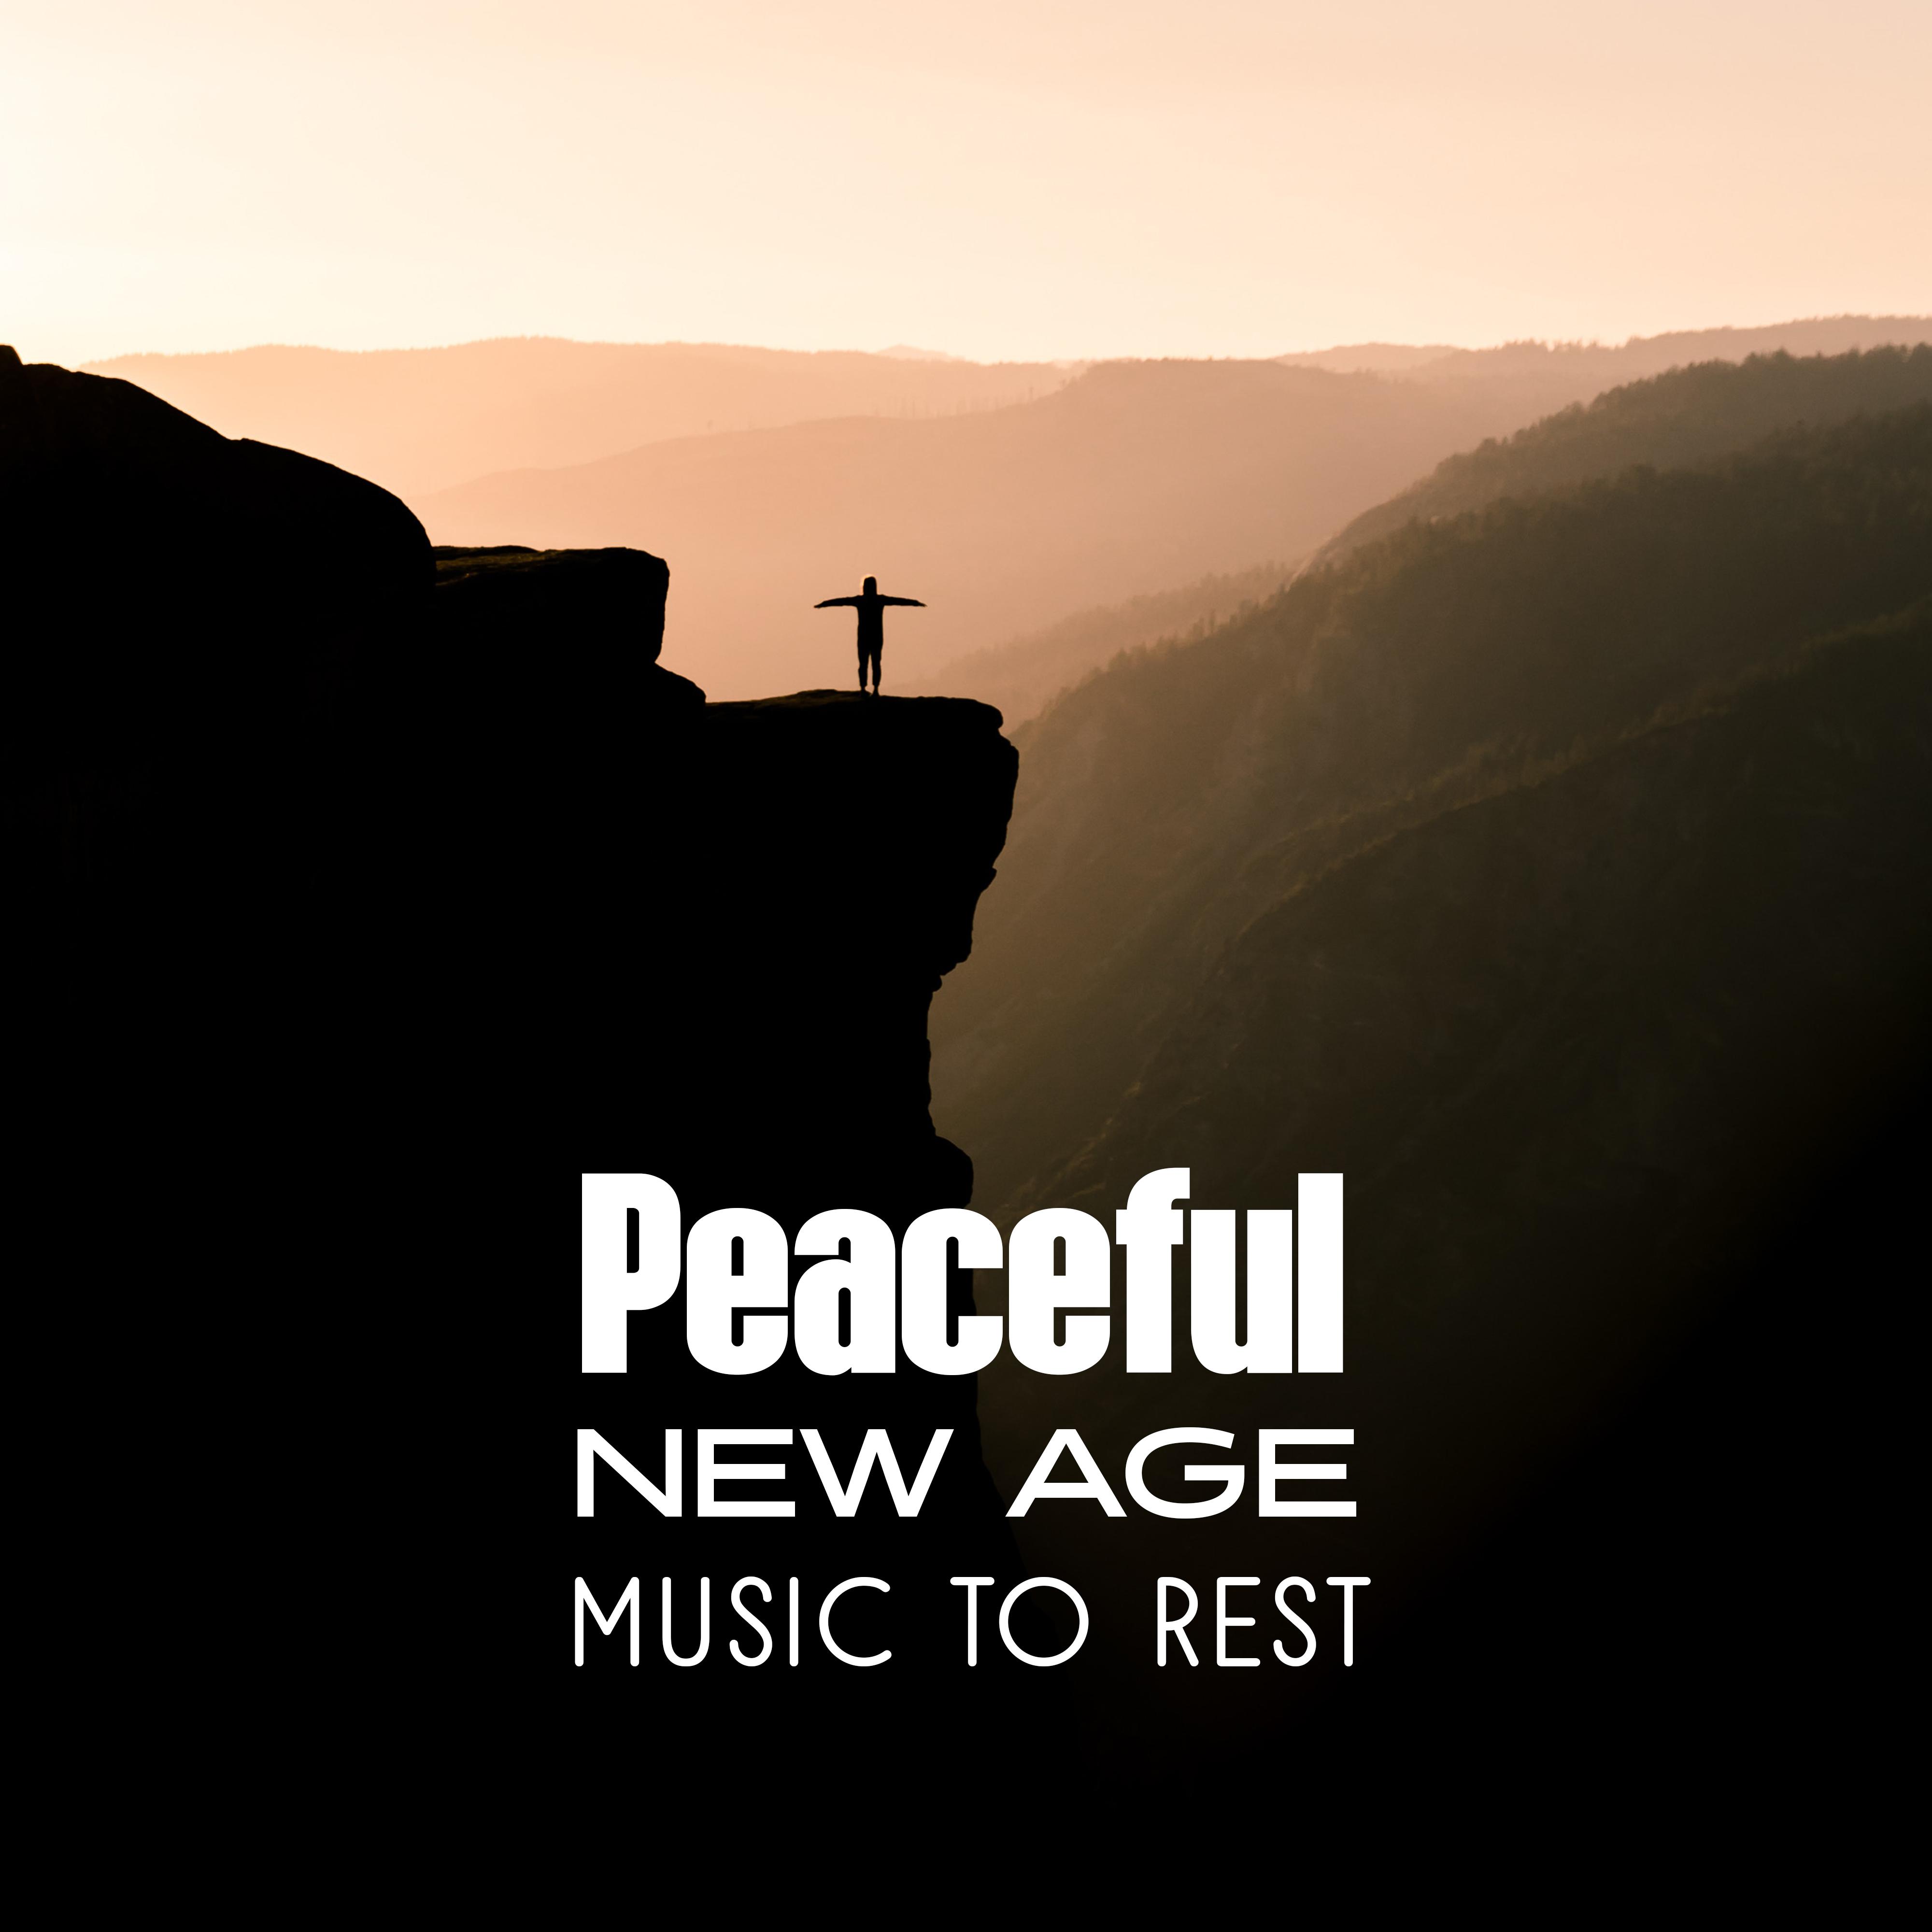 Peaceful New Age Music to Rest